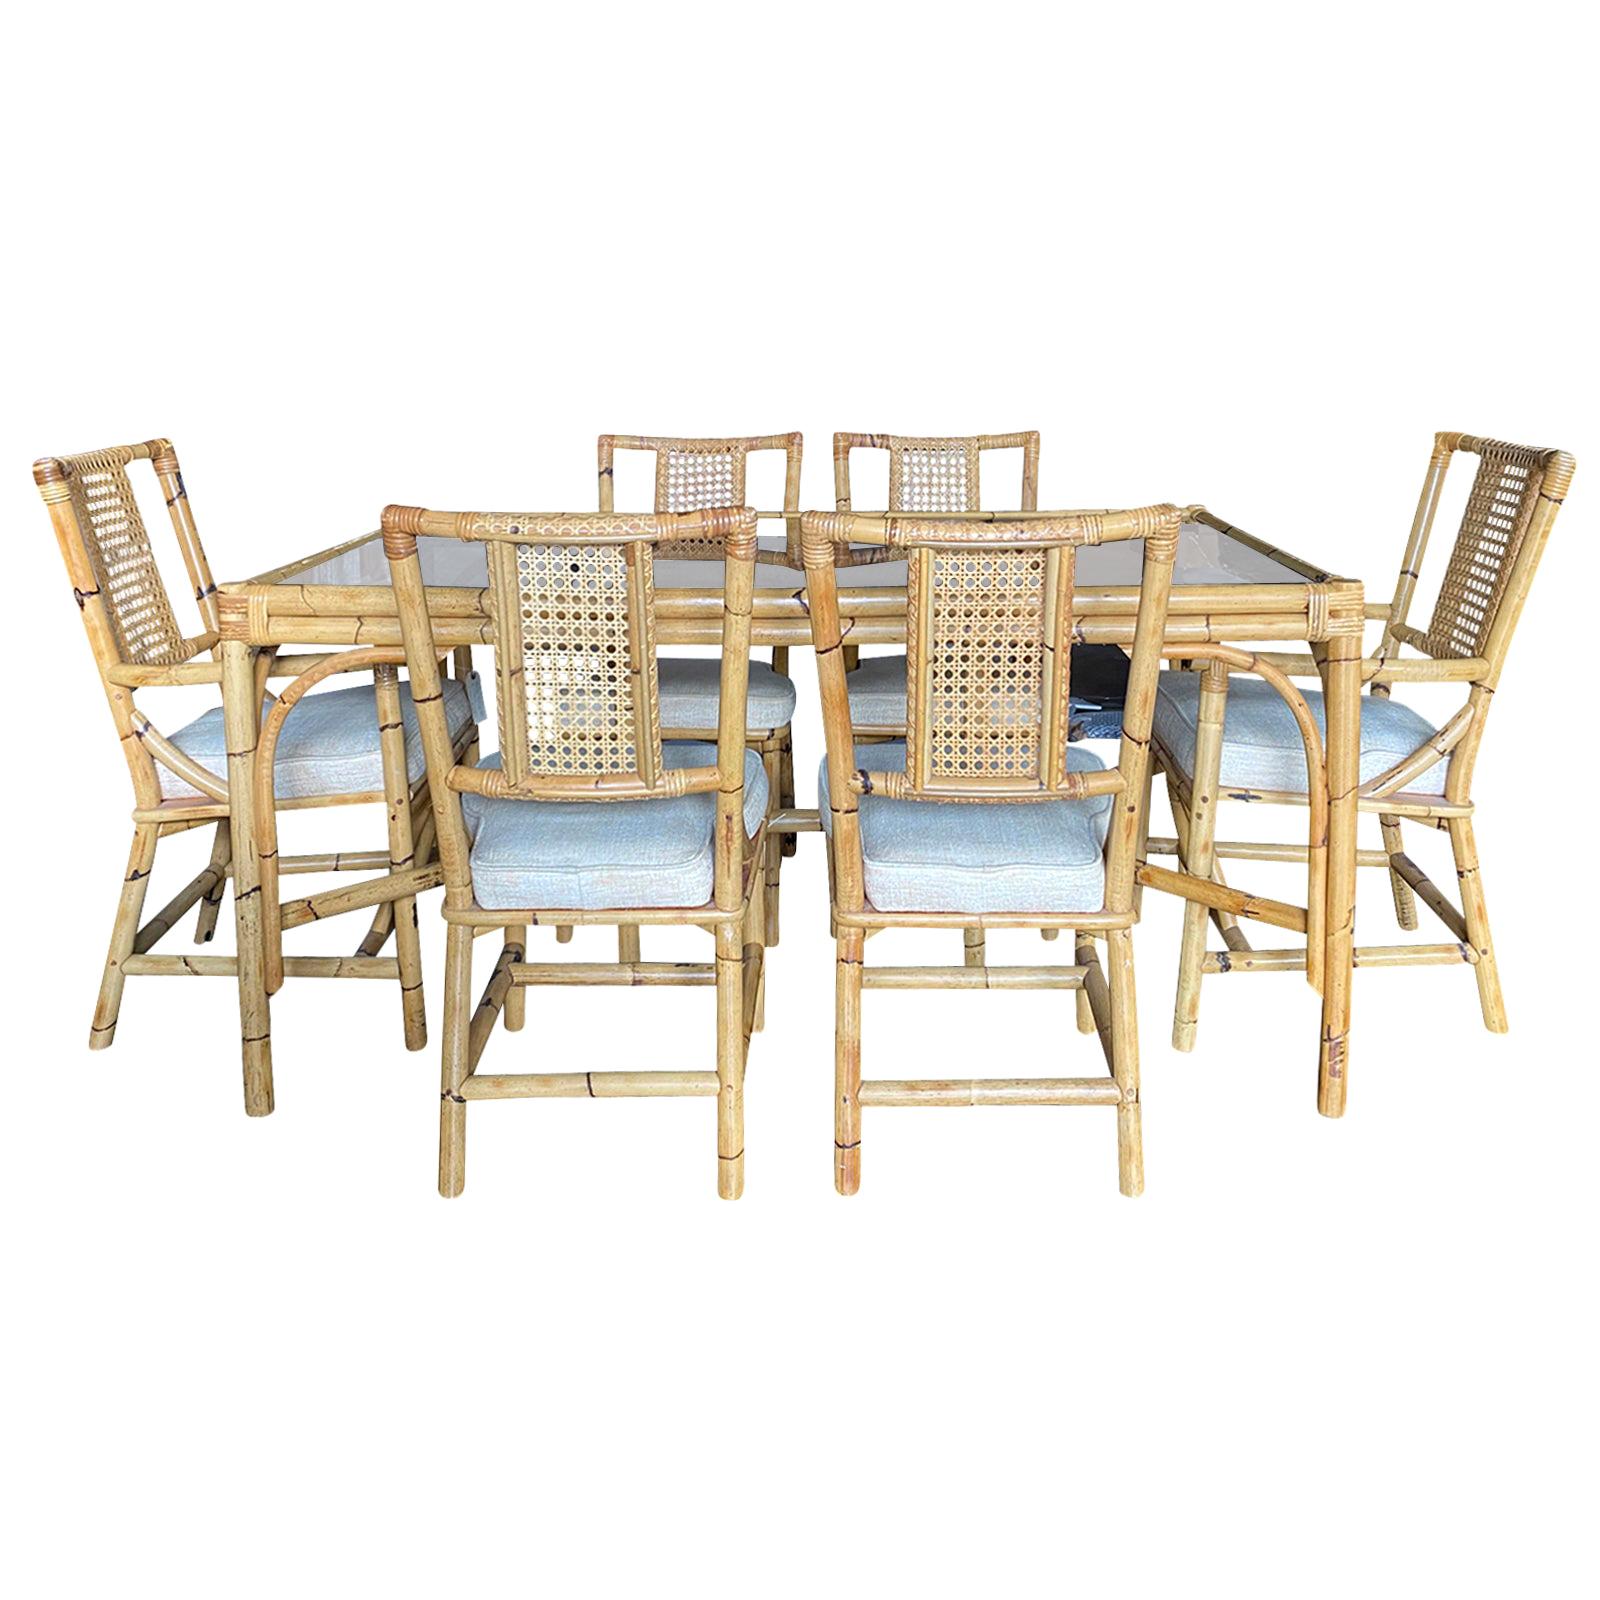 Mid-20th Century Bamboo Dining Table Set with 6 Rattan Dining Chairs For Sale